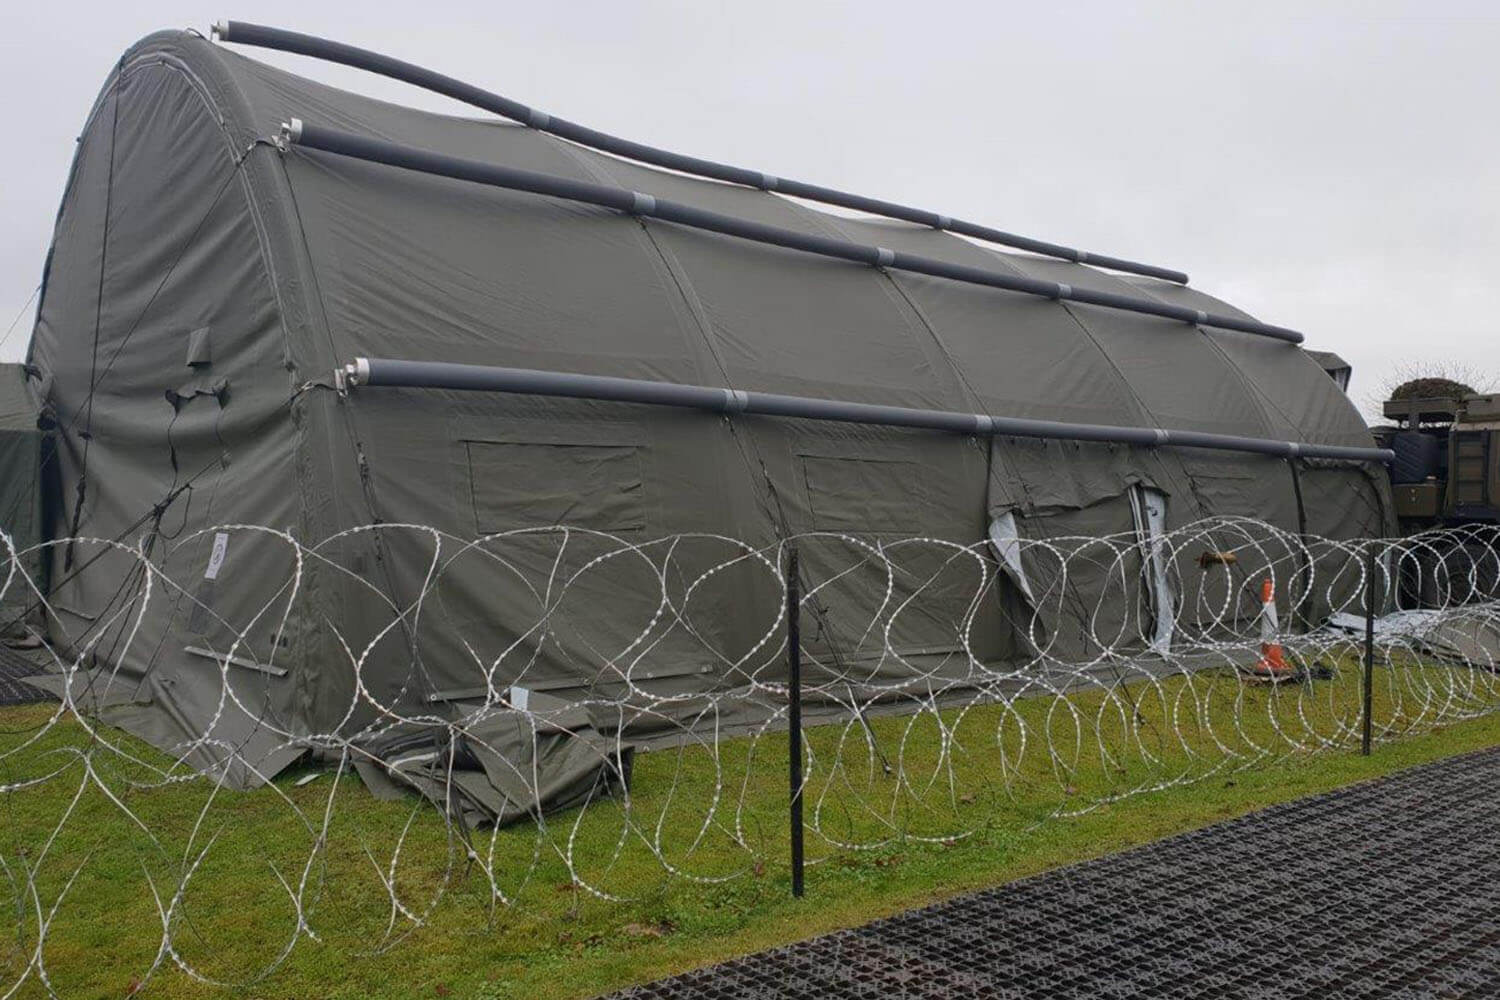 Rapid deploy inflatable military tent Nixus RIBS in a military base